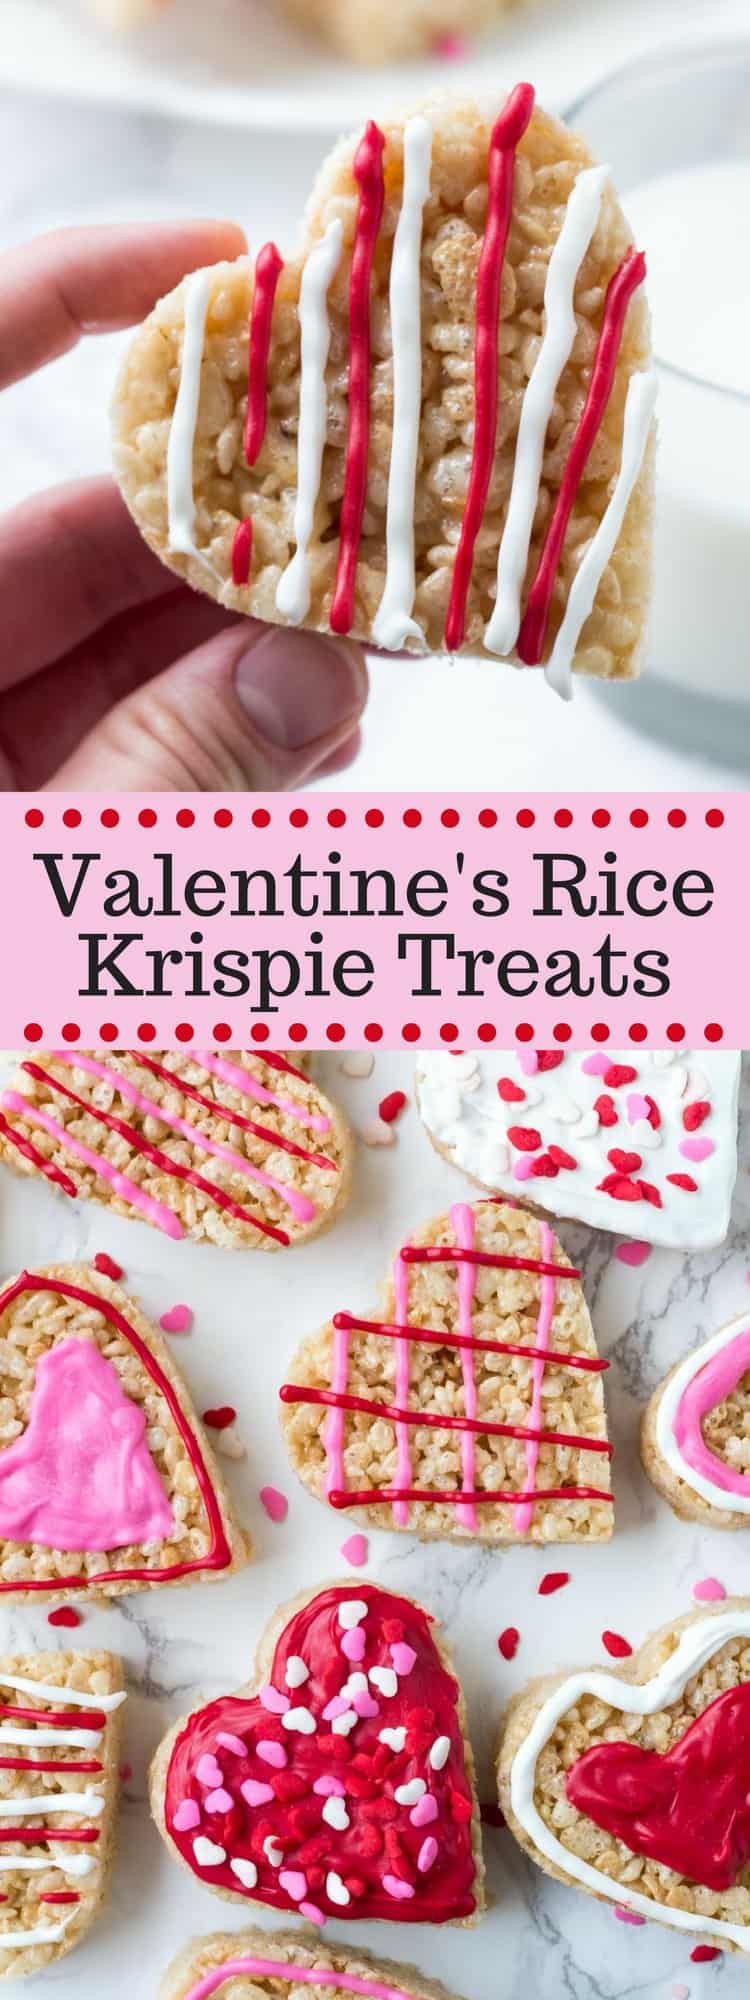 These Valentine's Rice Krispie treats are an easy, fun & festive recipe for February 14th. Kids will love making them, and they're a perfect treat to bring to school or Valentine's day parties.